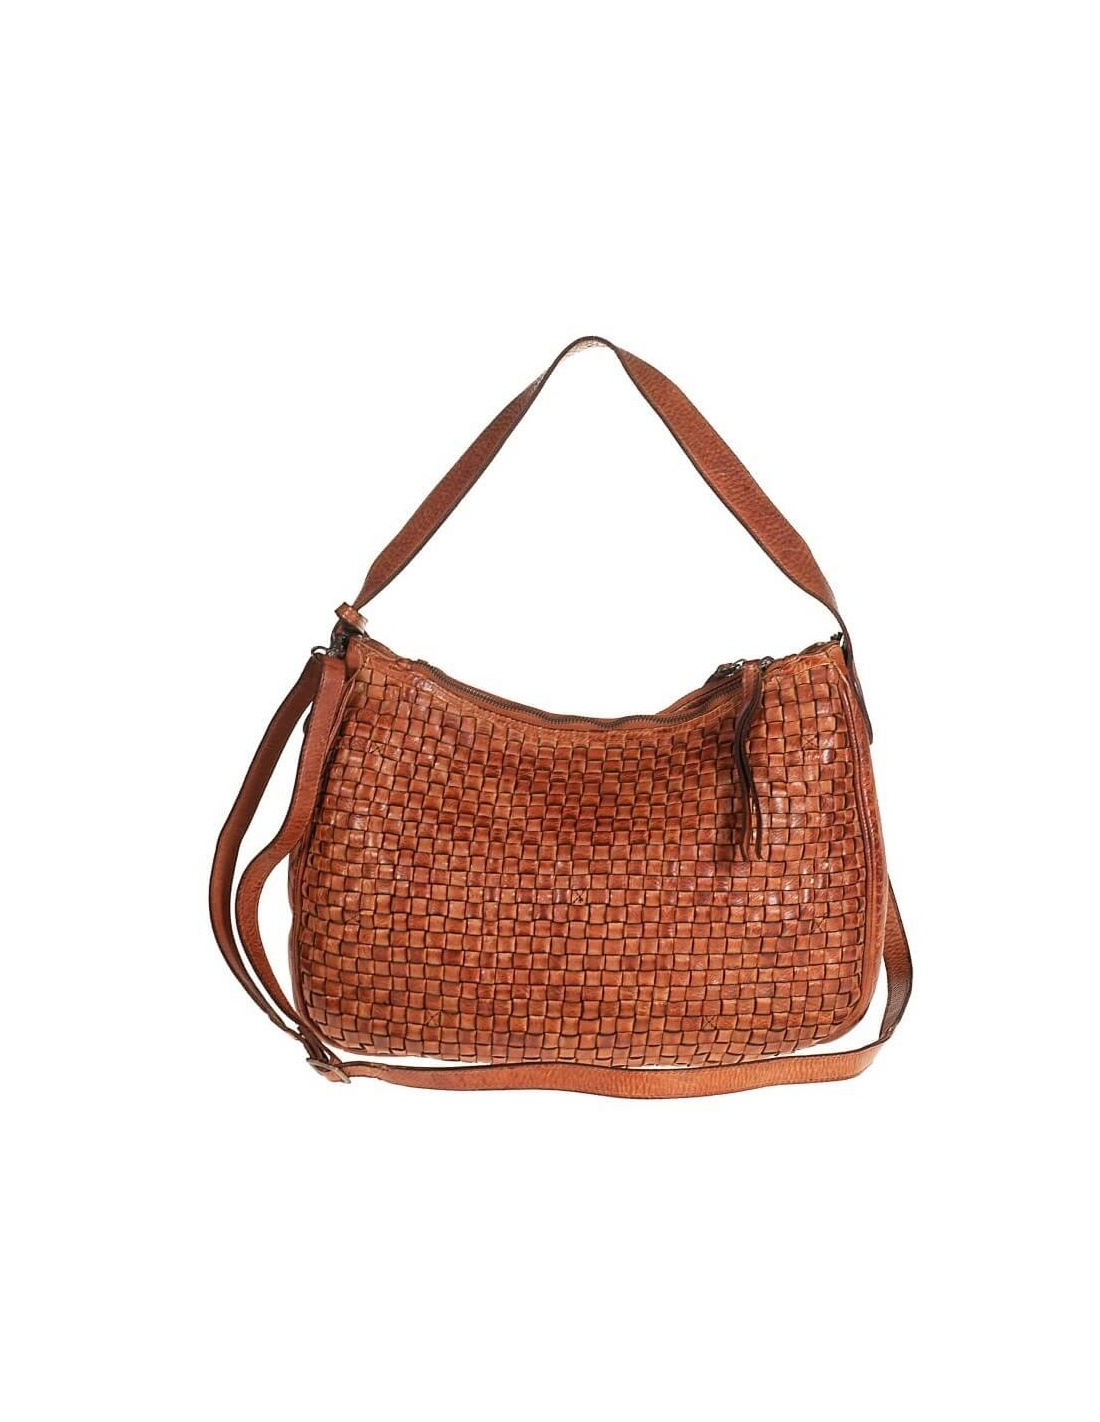 Woven leather bag. Luxury bag handmade in Italy - Nude